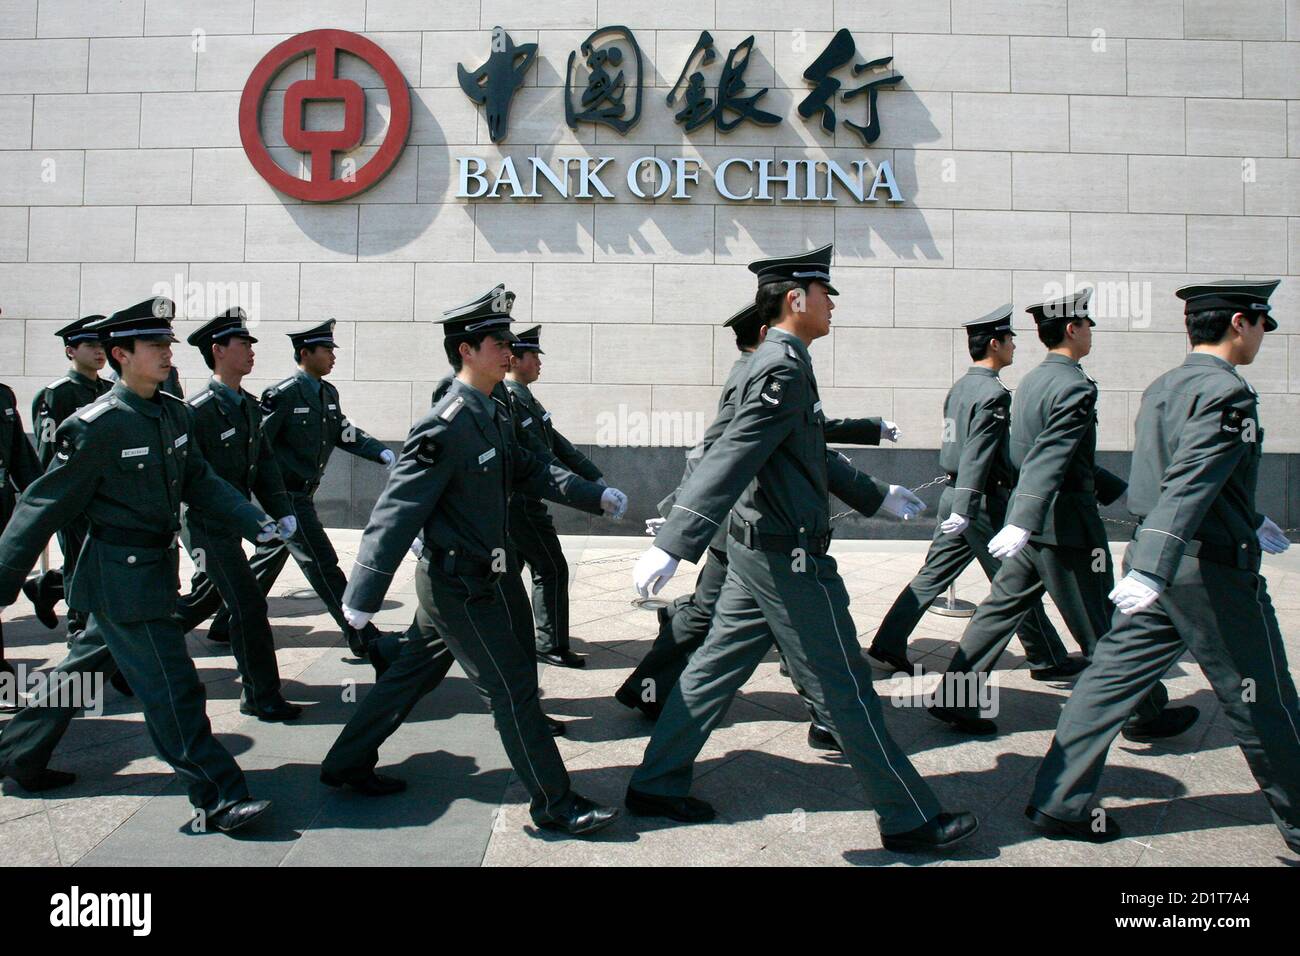 Chinese security guards march outside the Bank of China head office in Beijing March 27, 2008. Chinese banks, widely considered as possible buyers of more U.S. financial assets amid the snowballing credit crisis, are becoming picky and cautious due to increasing concerns about investment risks.    REUTERS/Claro Cortes IV   (CHINA) Stock Photo